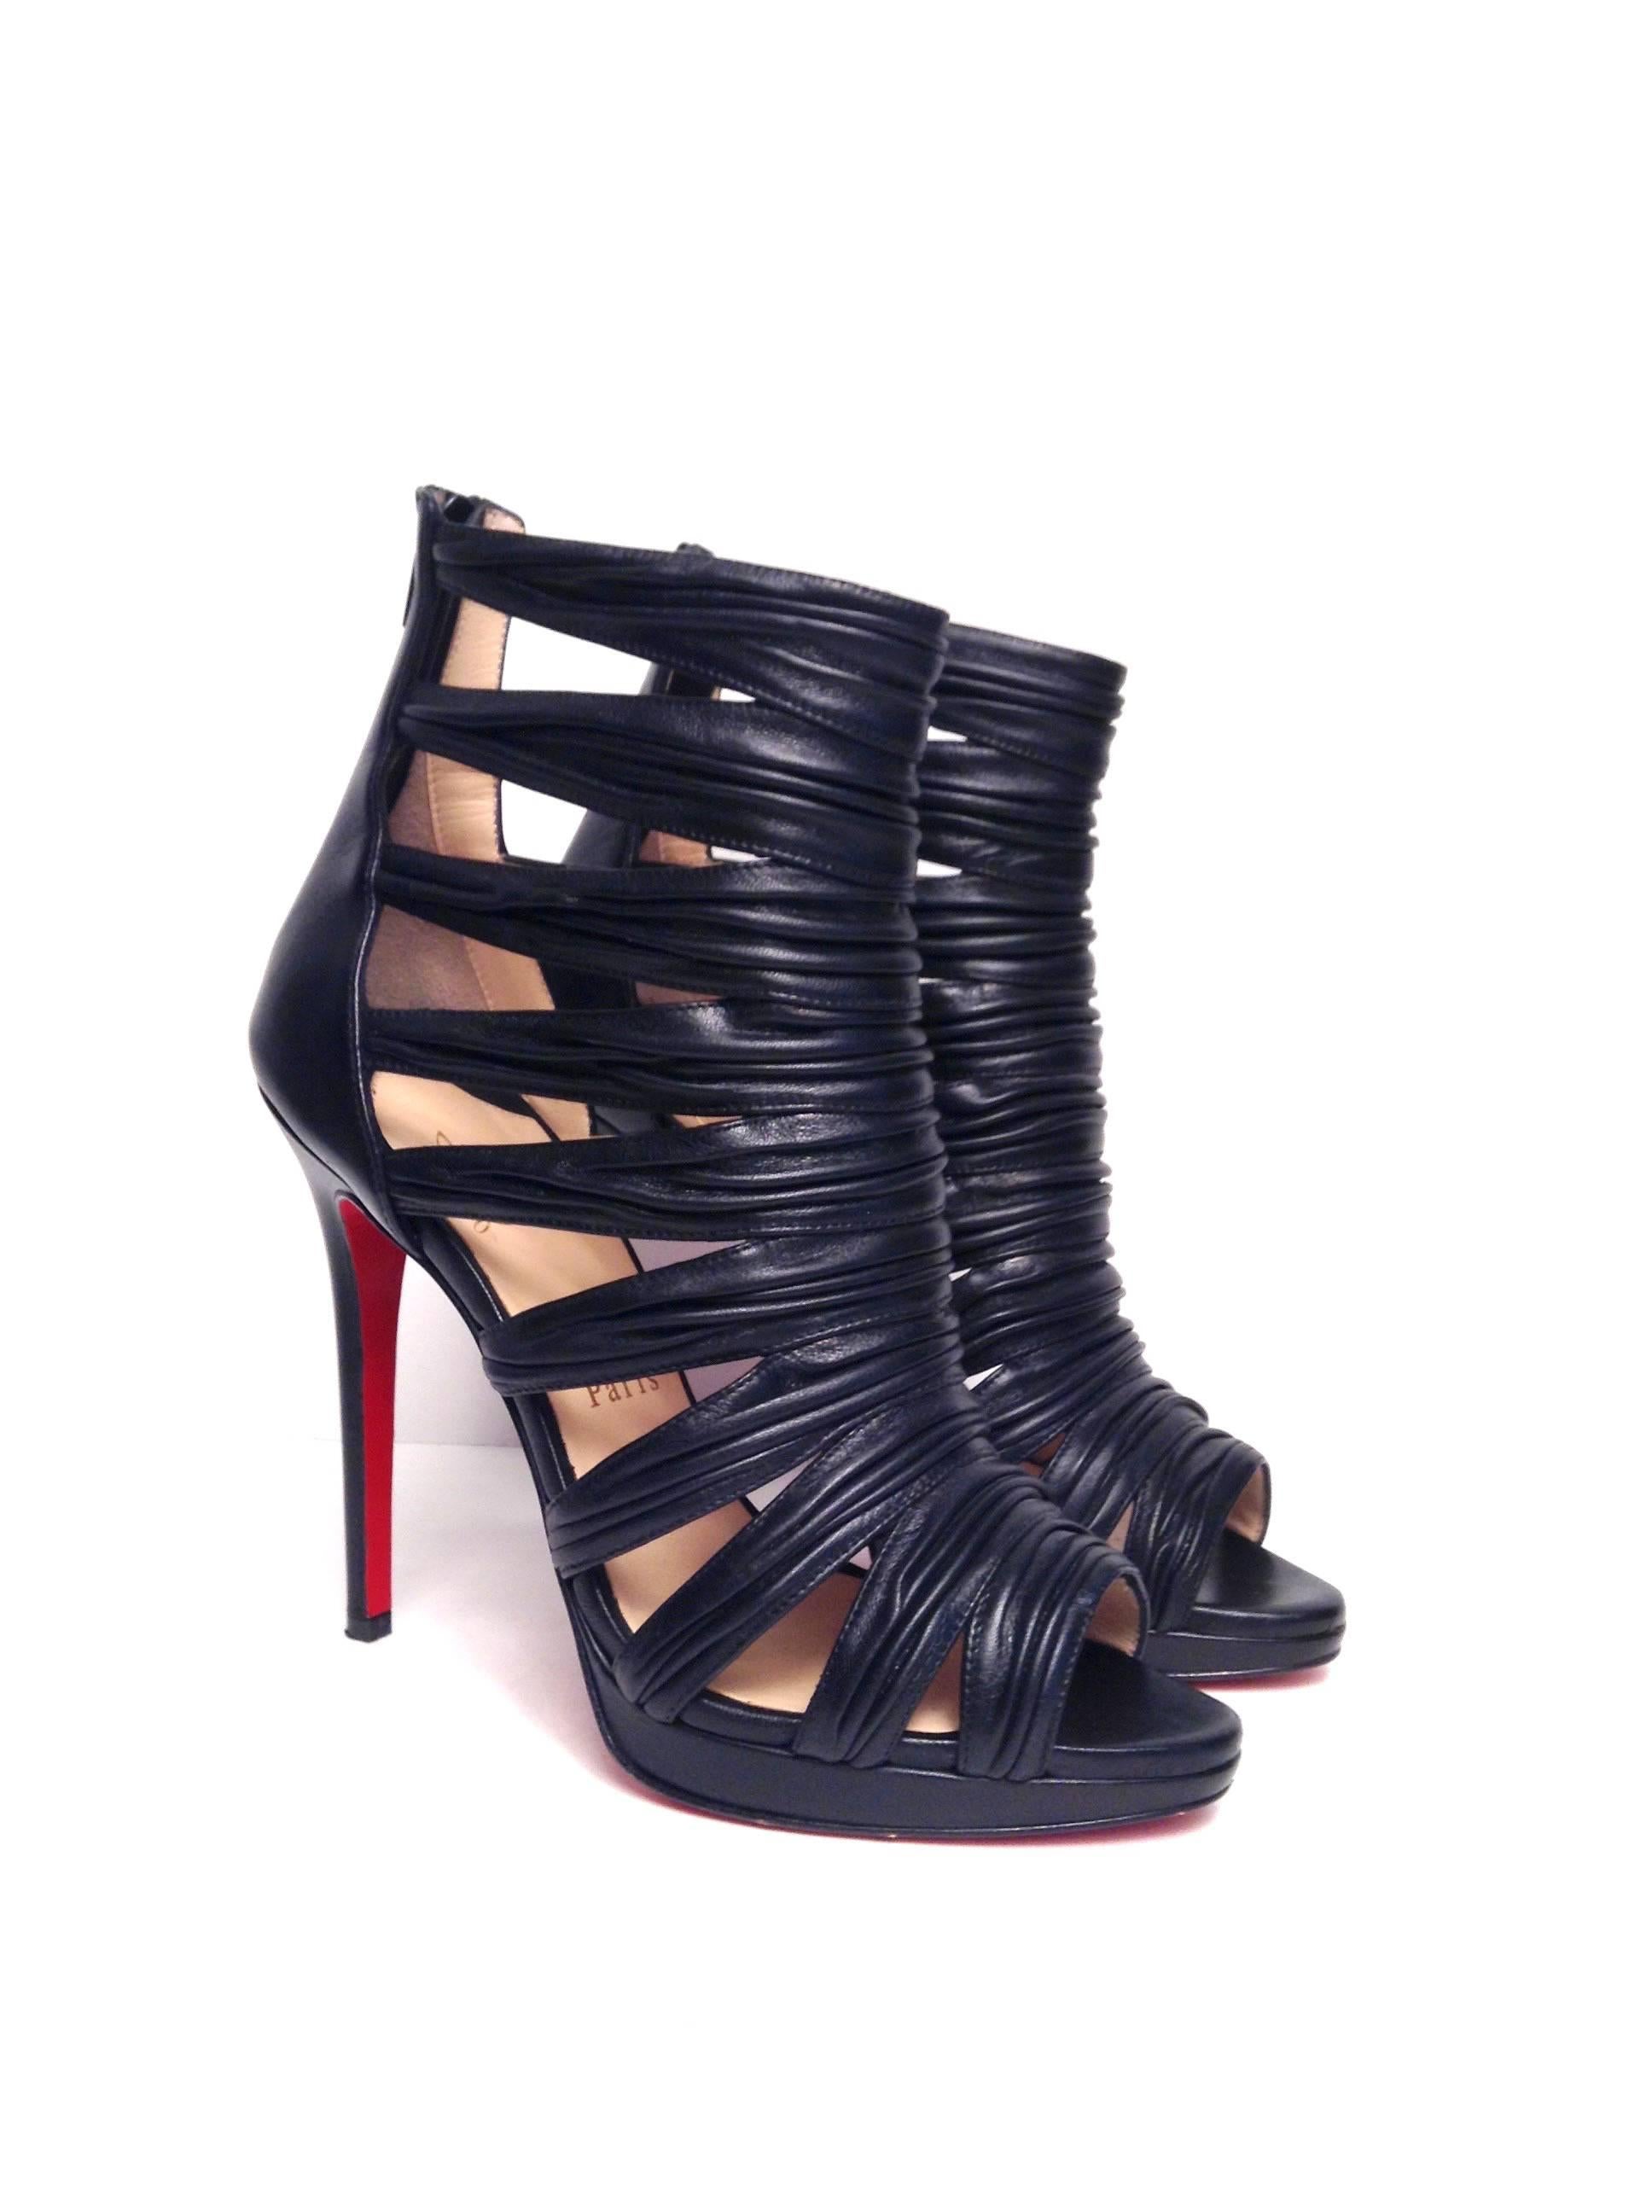 Christian Louboutin Tinazata Ruched Cage Bootie Size 39 For Sale 2